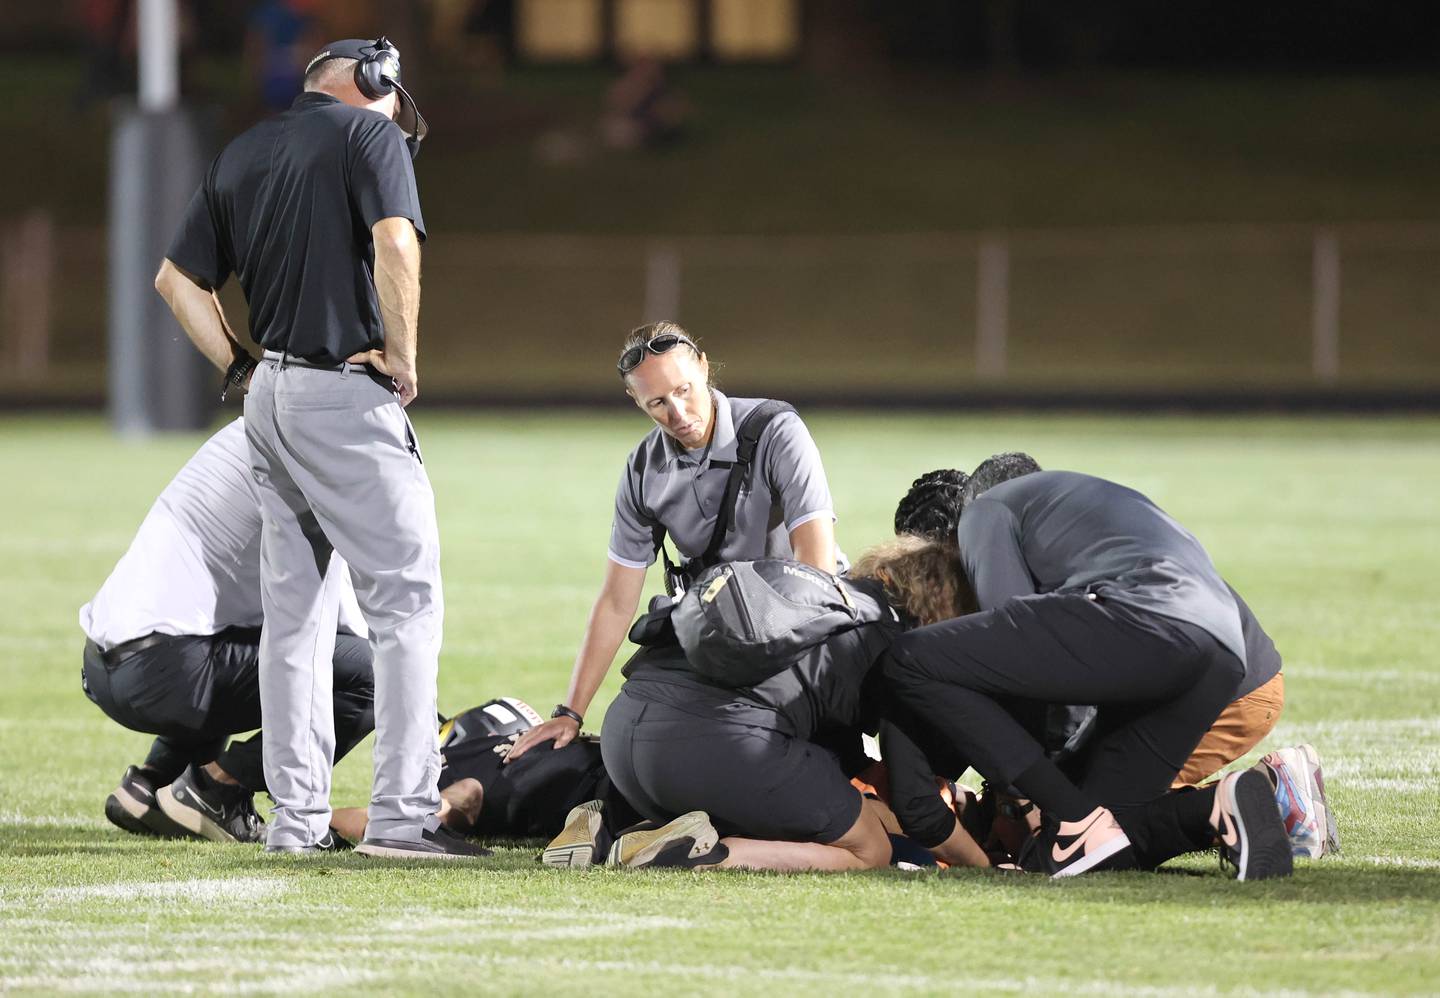 Shelby Bernard, (middle) an athletic trainer with Northwestern Medicine, and Ankur Rishi Behl, (right) an orthopedic surgeon with Northwestern Medicine, along with Sycamore coaches and members of the Sycamore High School athletic training staff treat an injured player during the football game Friday Sept.  2, 2022, at Sycamore High School.